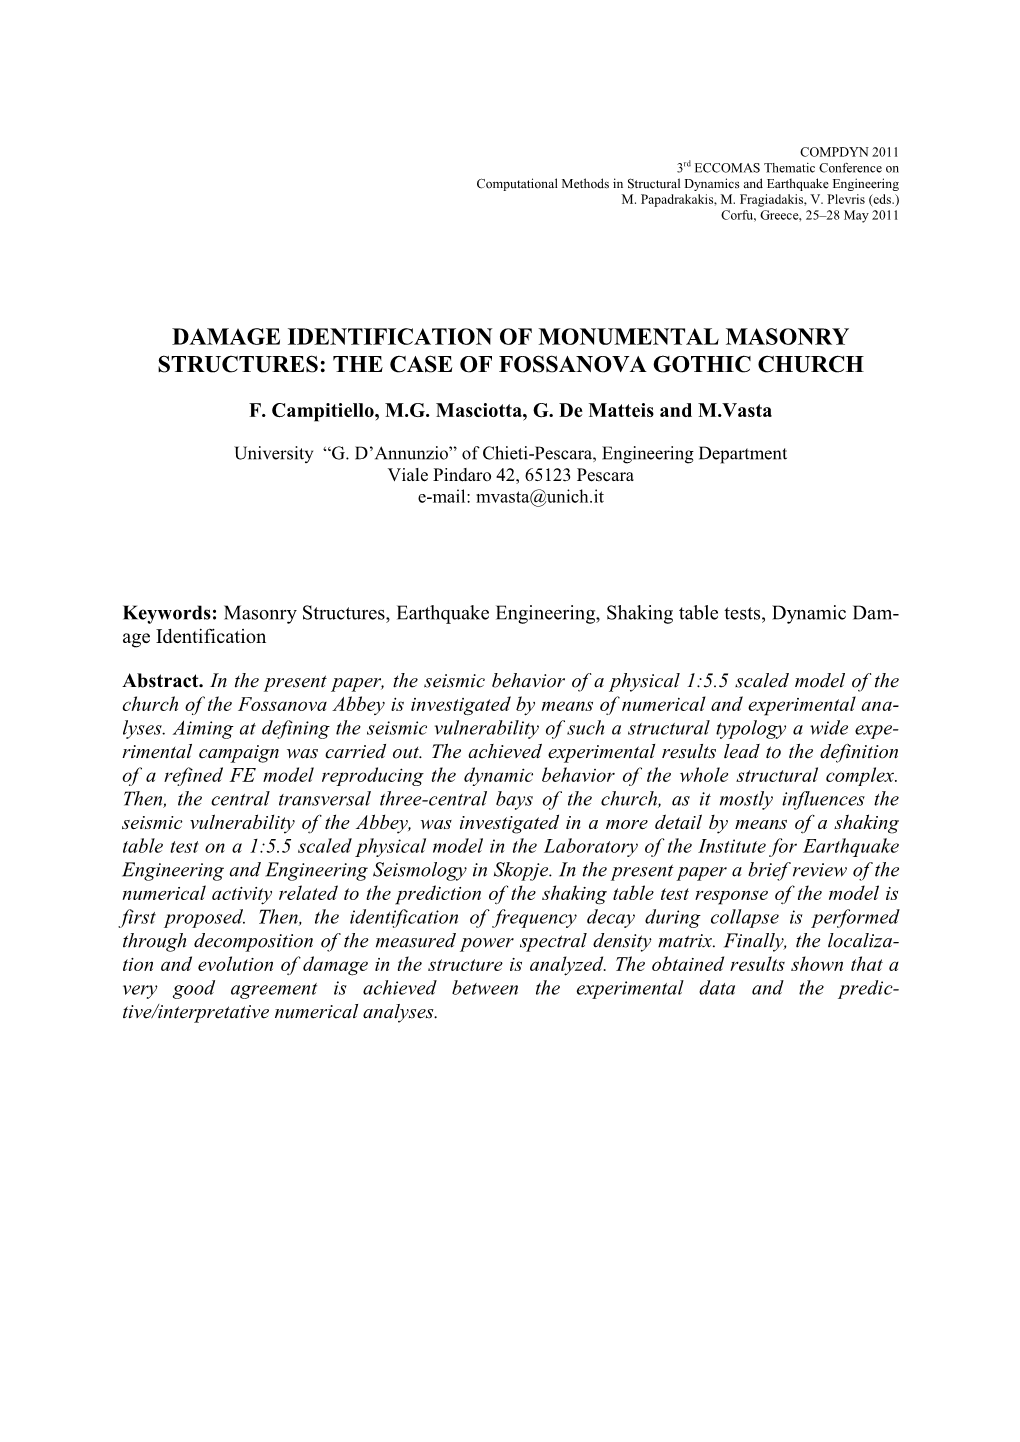 ECCOMAS Thematic Conference on Computational Methods in Structural Dynamics and Earthquake Engineering M